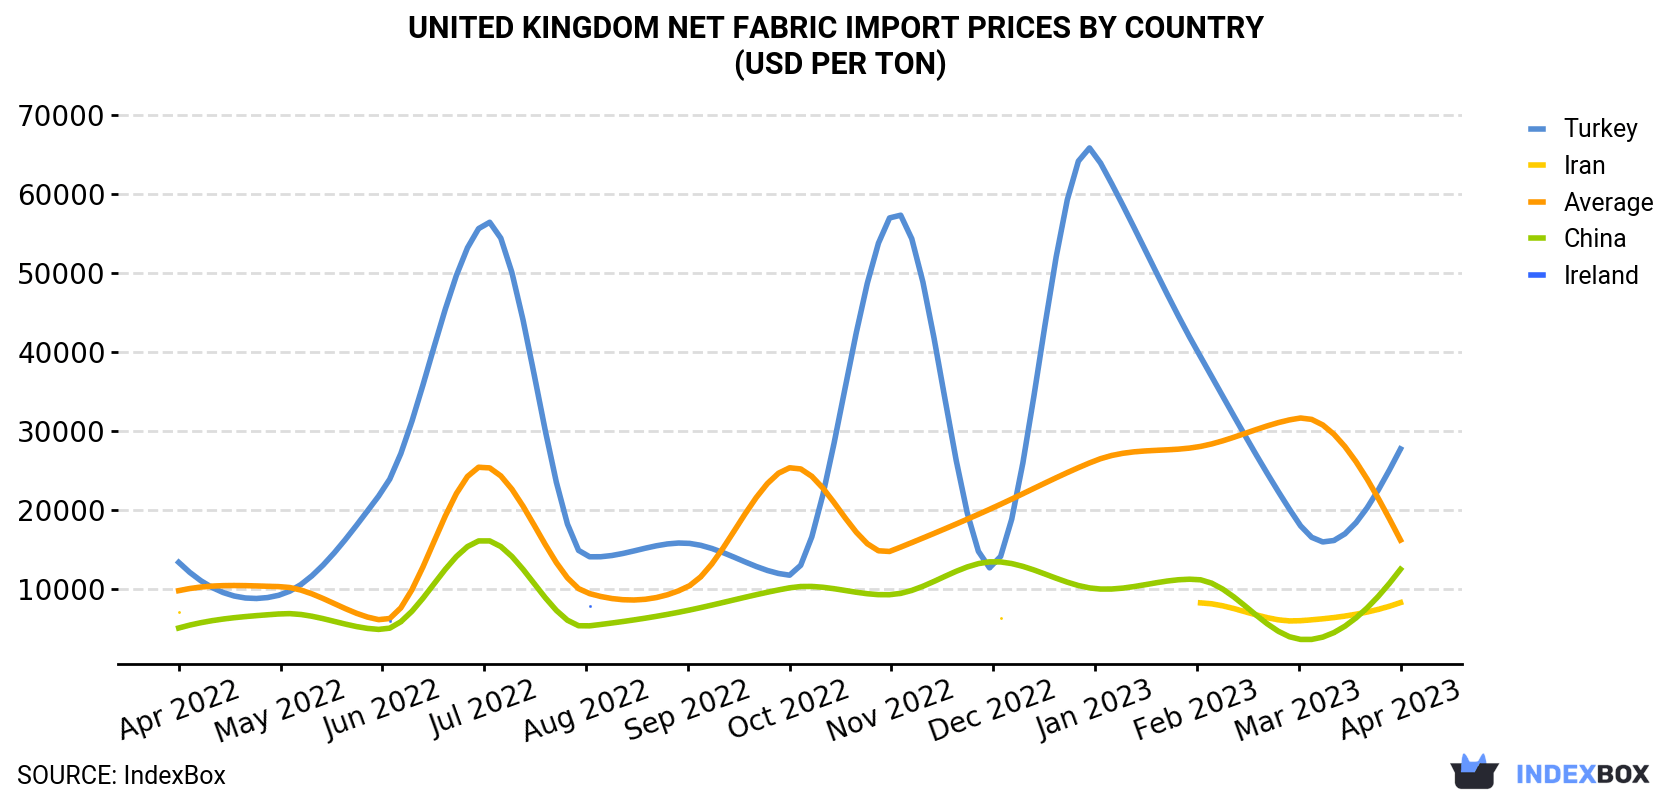 United Kingdom Net Fabric Import Prices By Country (USD Per Ton)